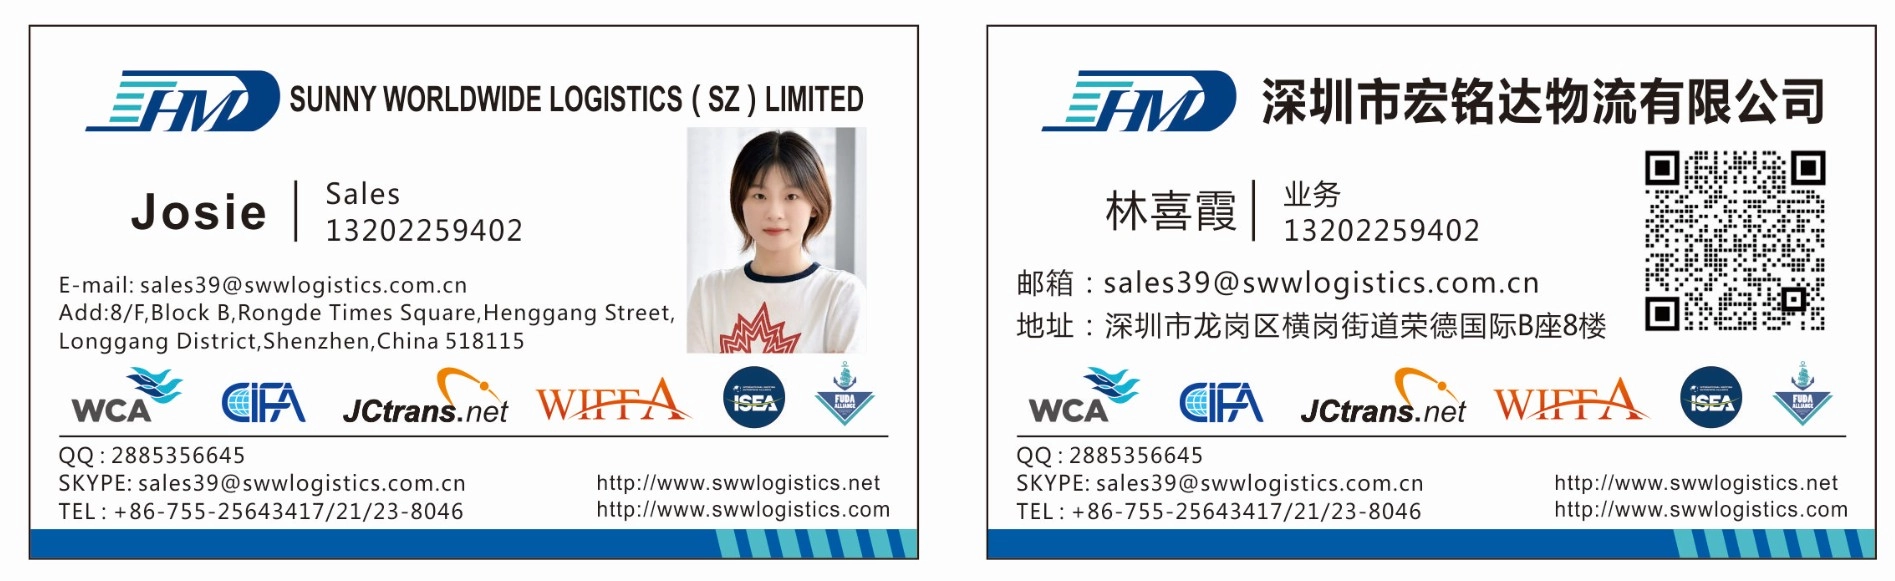 Freight forwarder China to Philippines DDP cheap air shipping, Sunny Worldwide Logistics